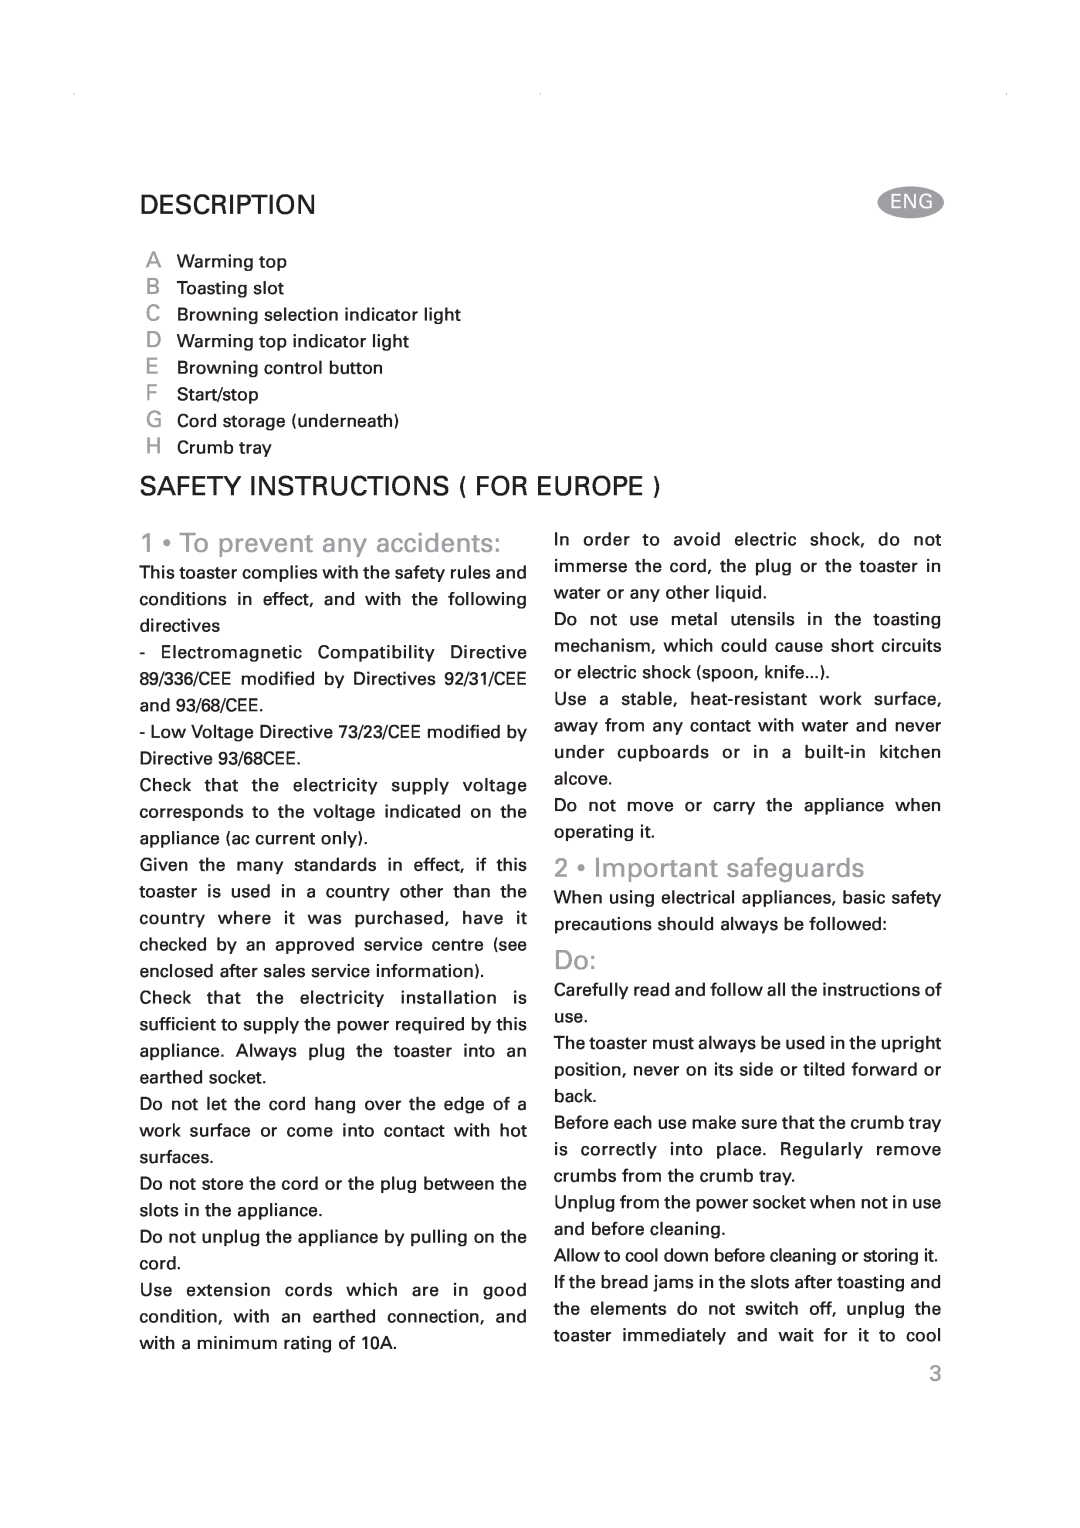 Rowenta Toaster manual Description, Safety Instructions For Europe, To prevent any accidents, Important safeguards 